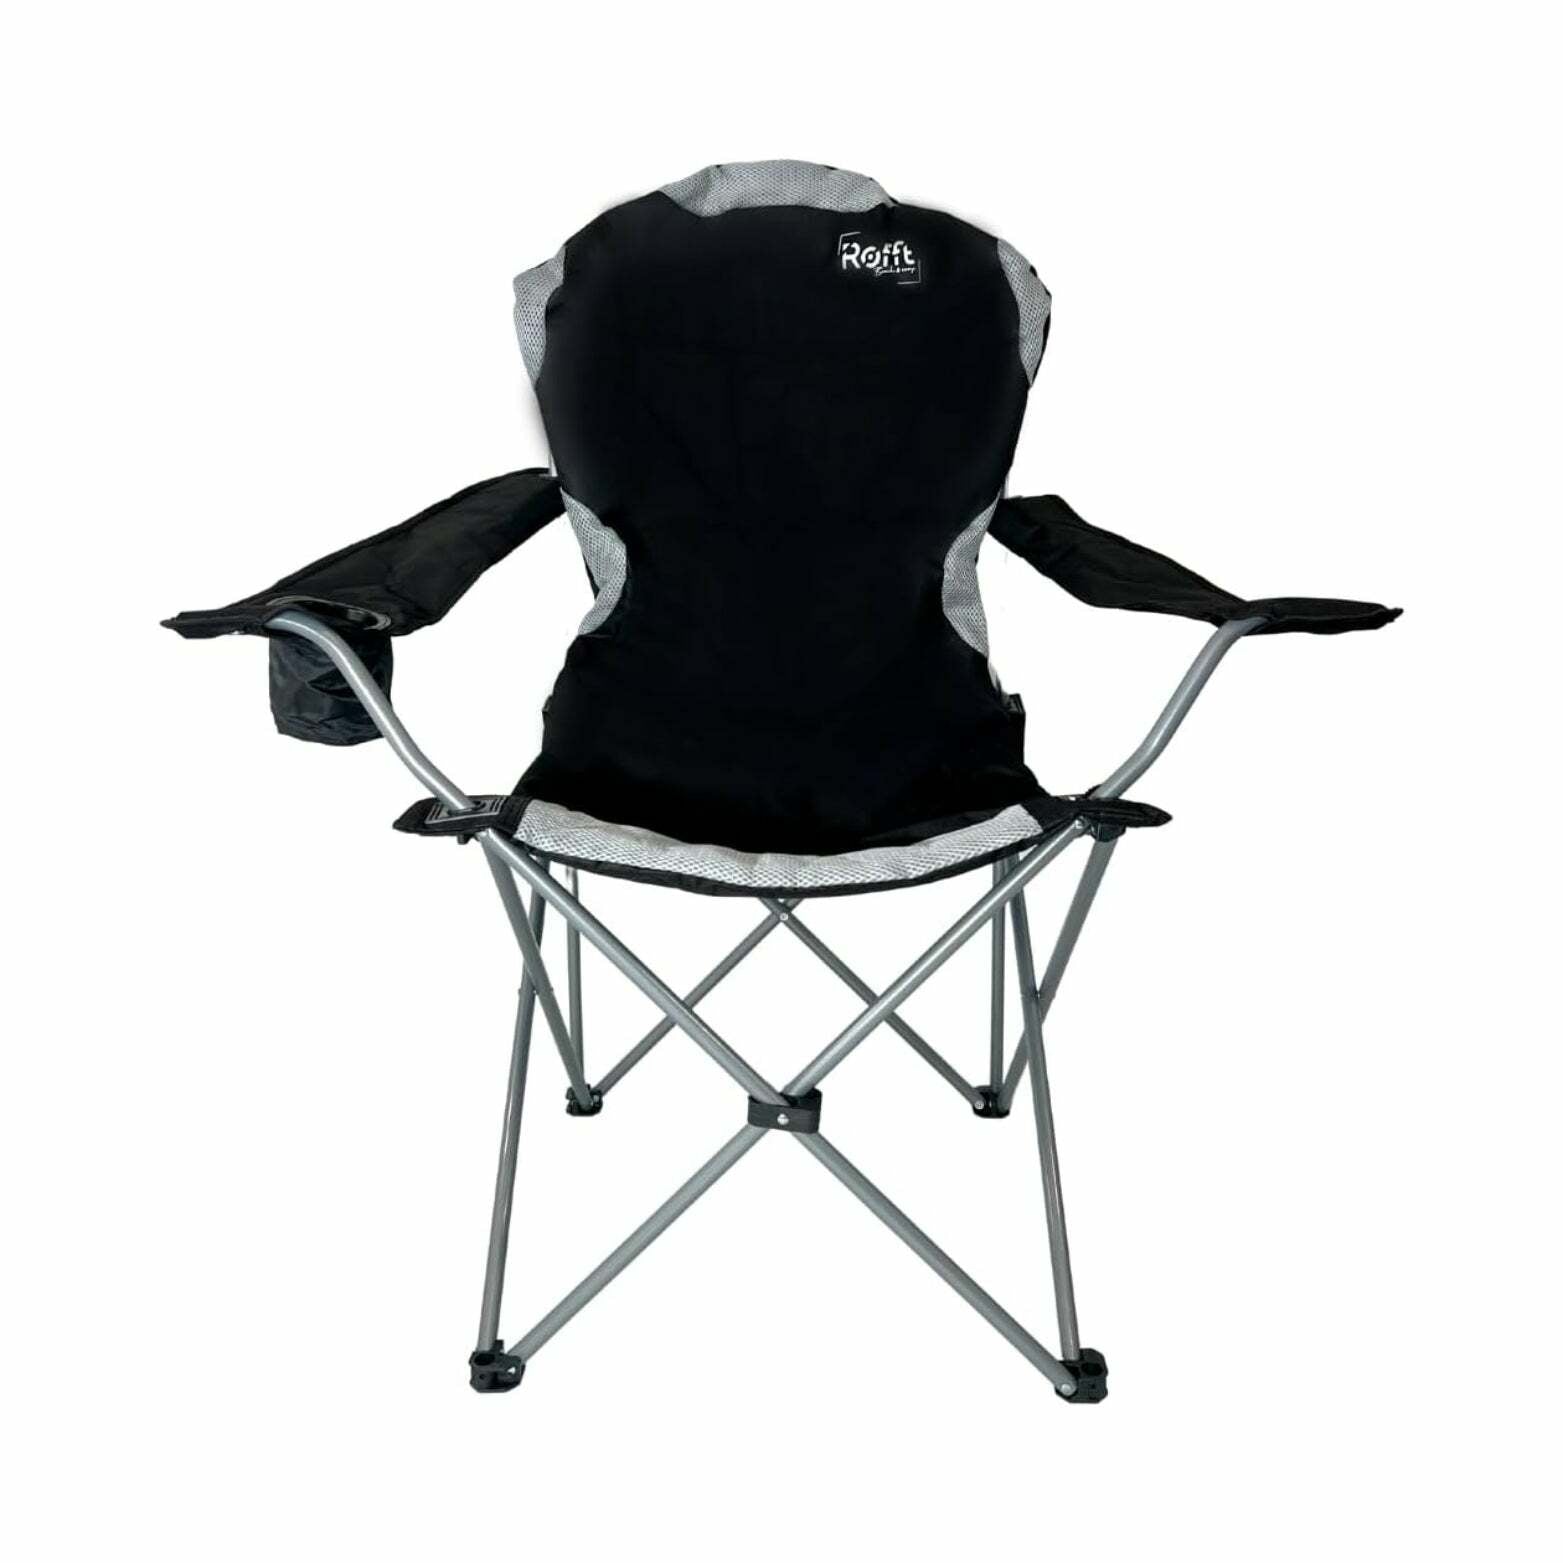 ROFFT Portable Camping Chair with Cooler - Collapsible, Comfort Padded, Cup Holder, Carry Bag Included, Black